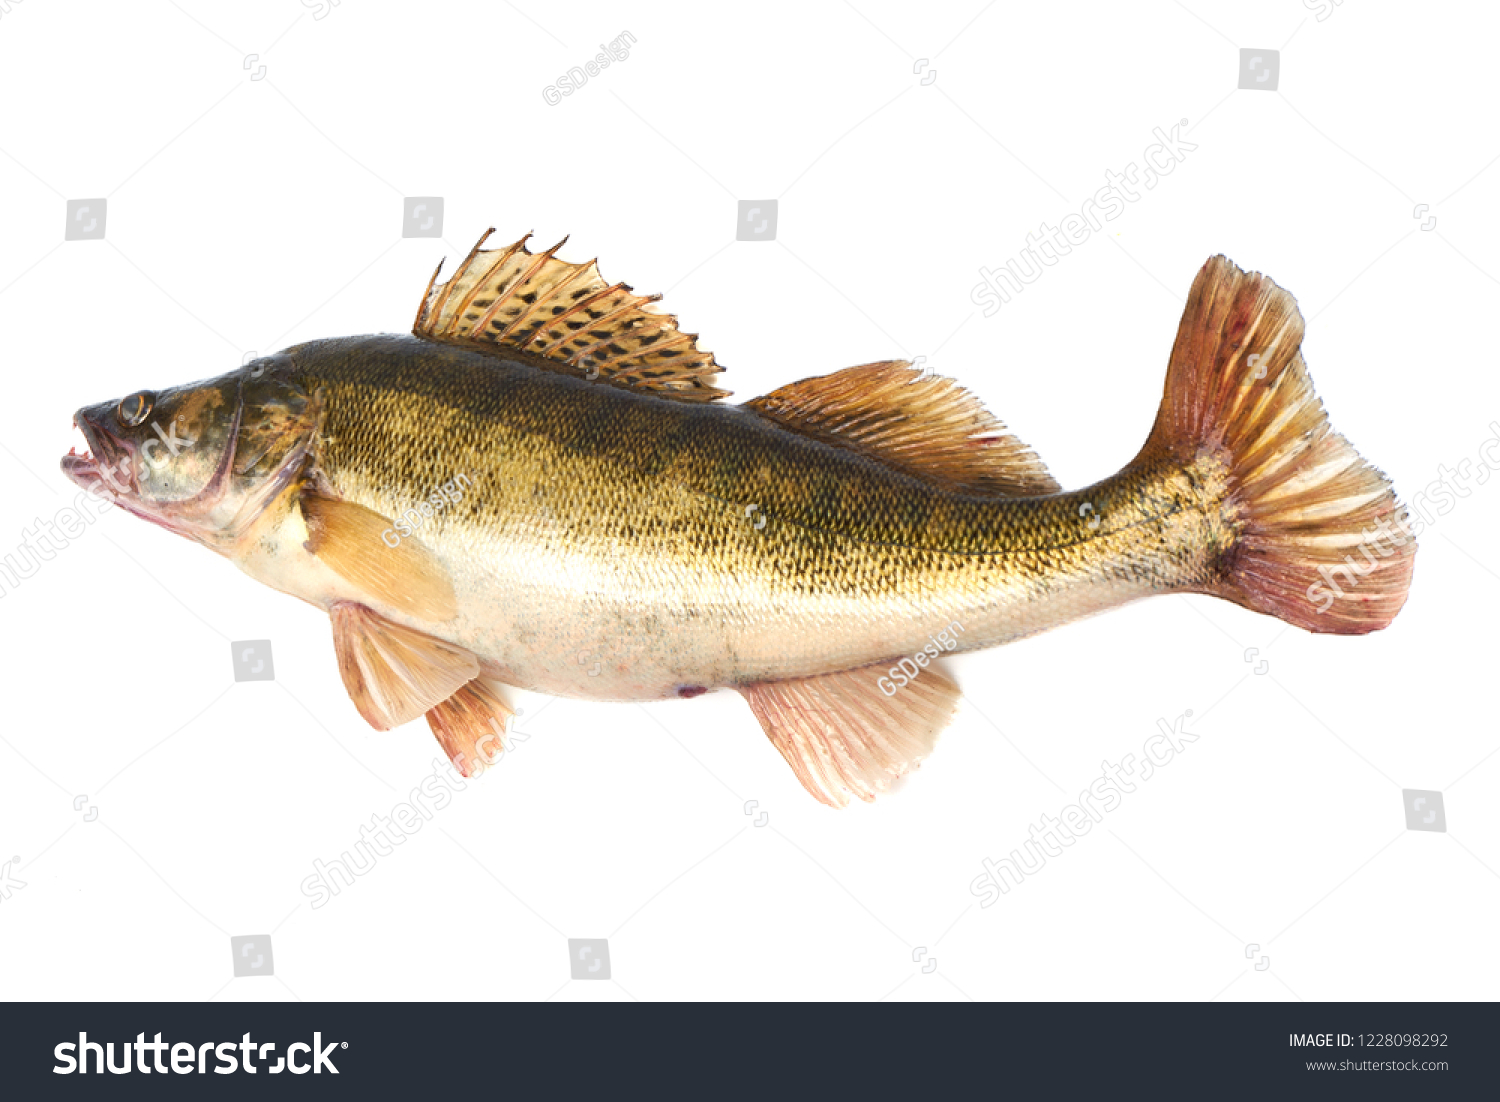 Predator Fish. Fresh Zander or Pike Perch Fish, isolated on a white background. Close-up. #1228098292